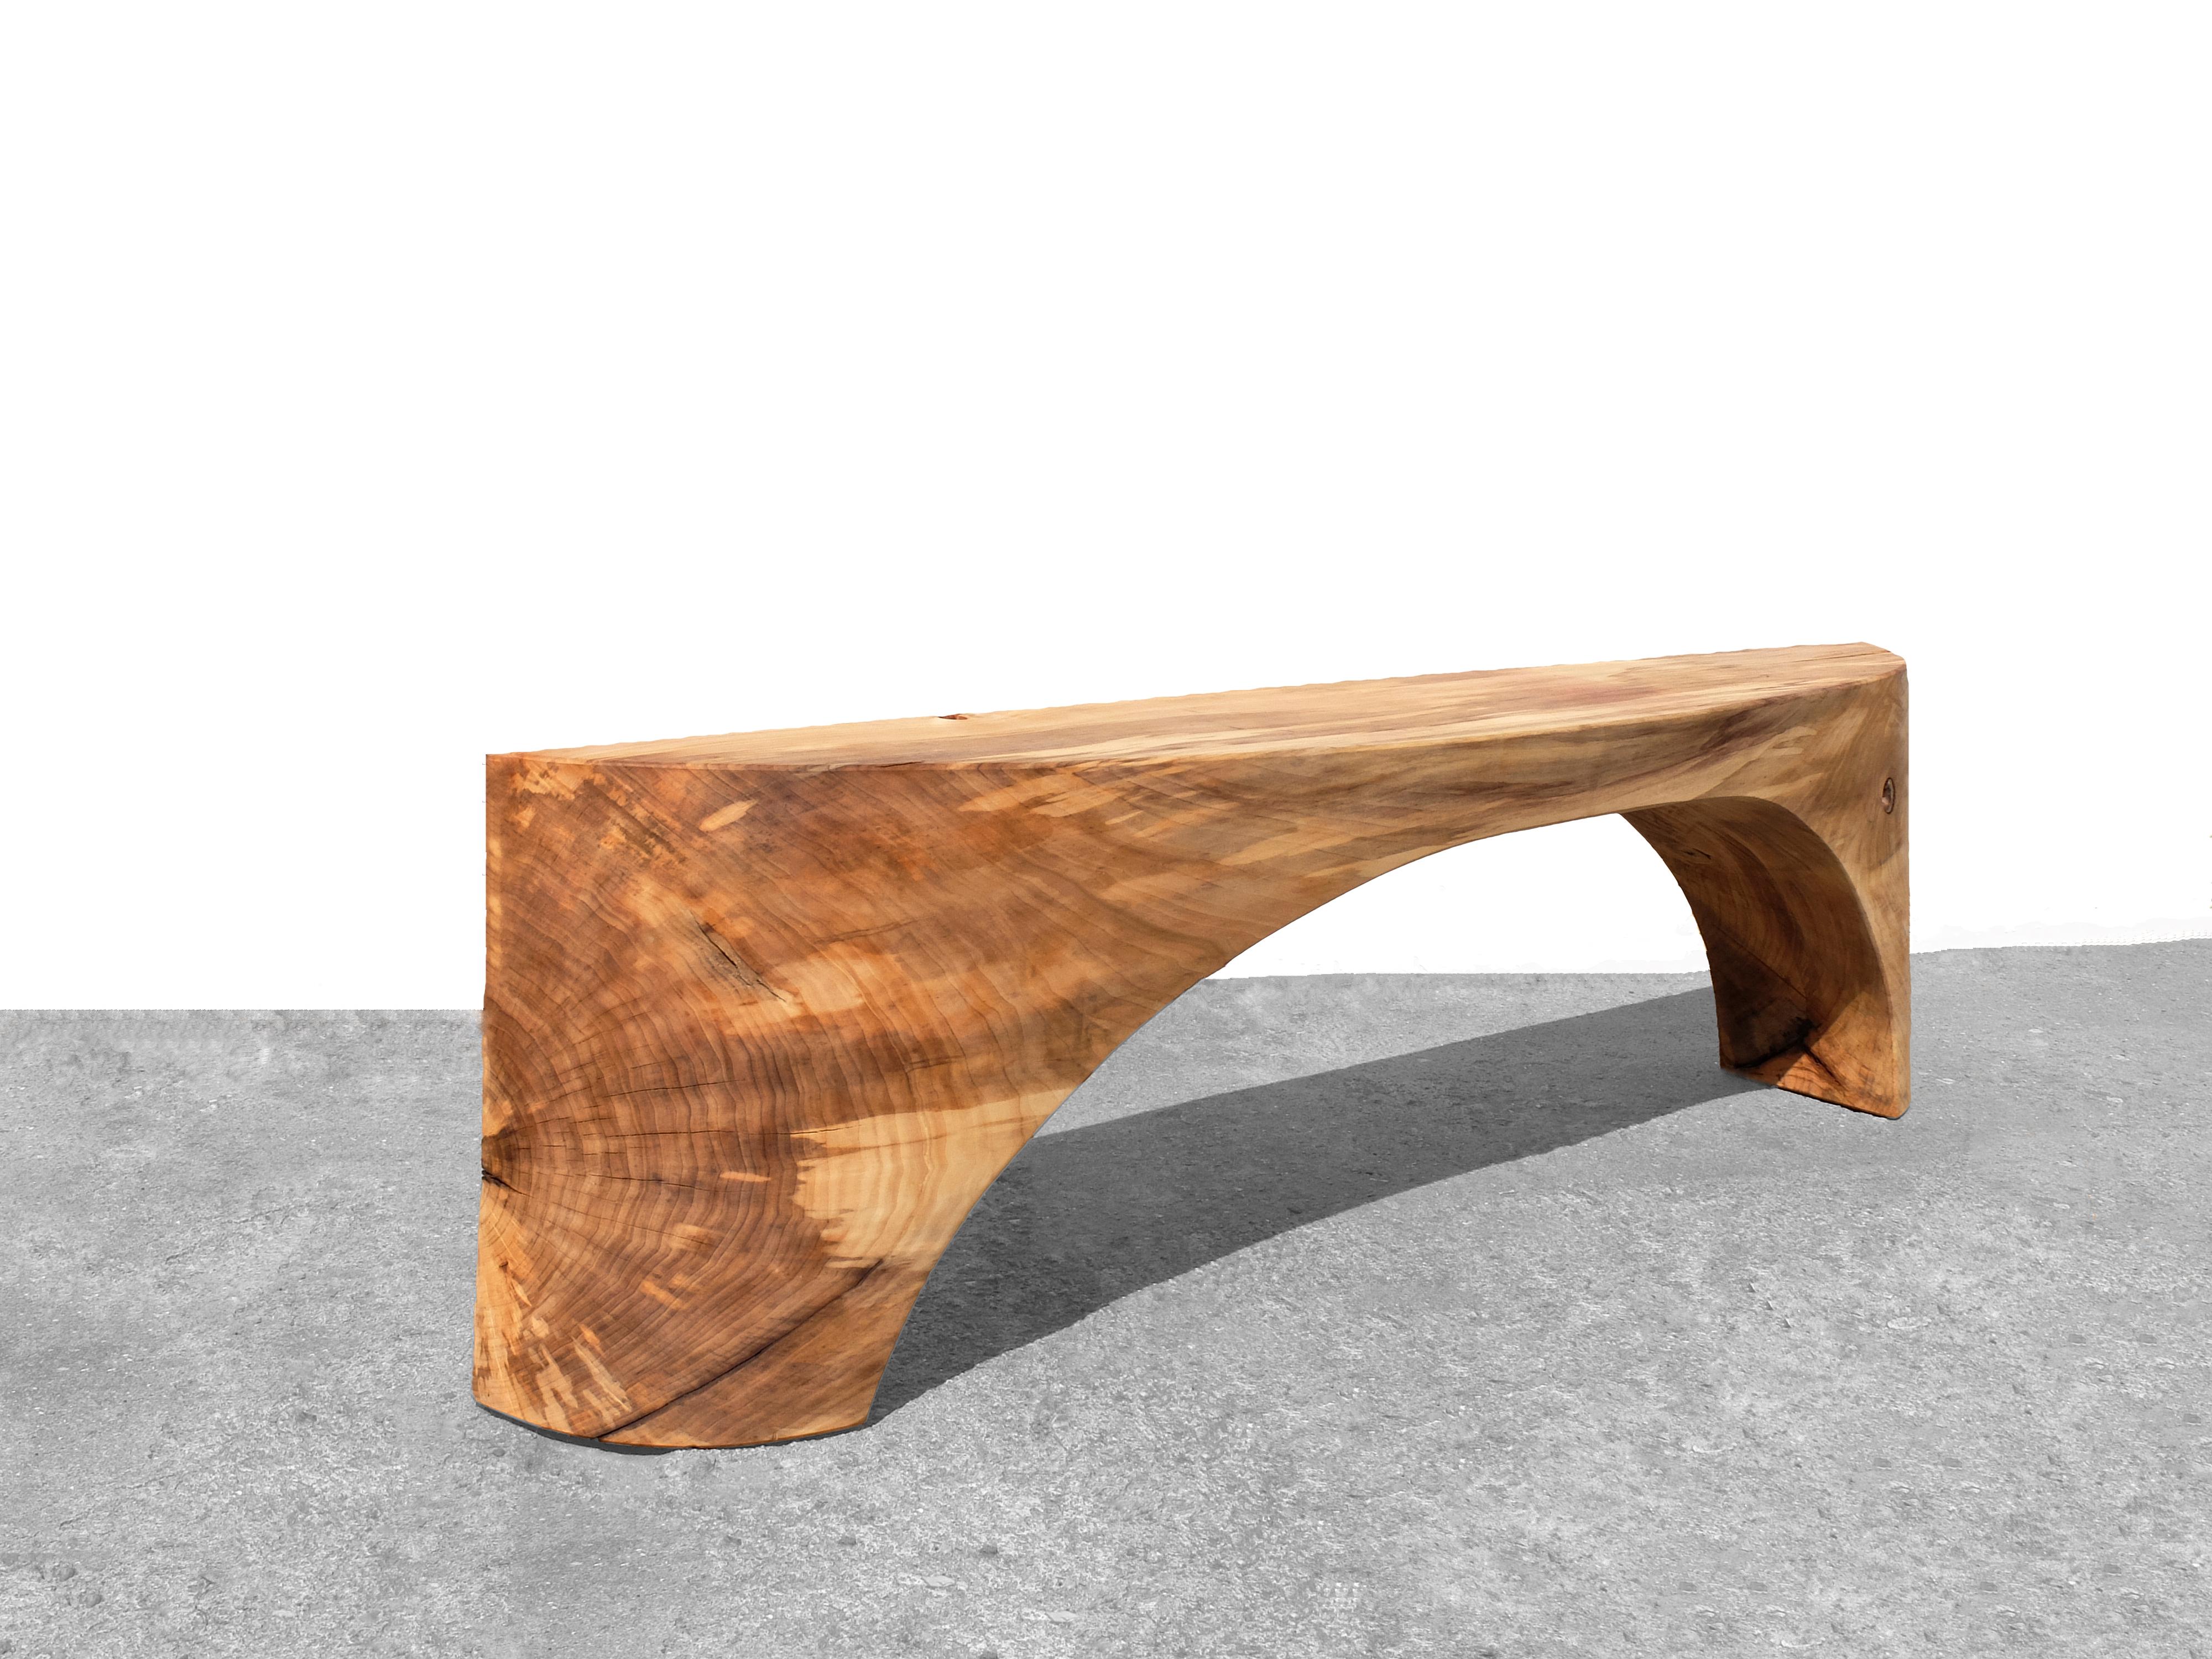 Unique bench sculpted by Jörg Pietschmann
Materials: Polished poplar, oil finish
Dimensions: H 59 x W 207 x D 33 cm

In Pietschmann’s sculptures, trees that for centuries were part of a landscape and founded in primordial forces tell stories